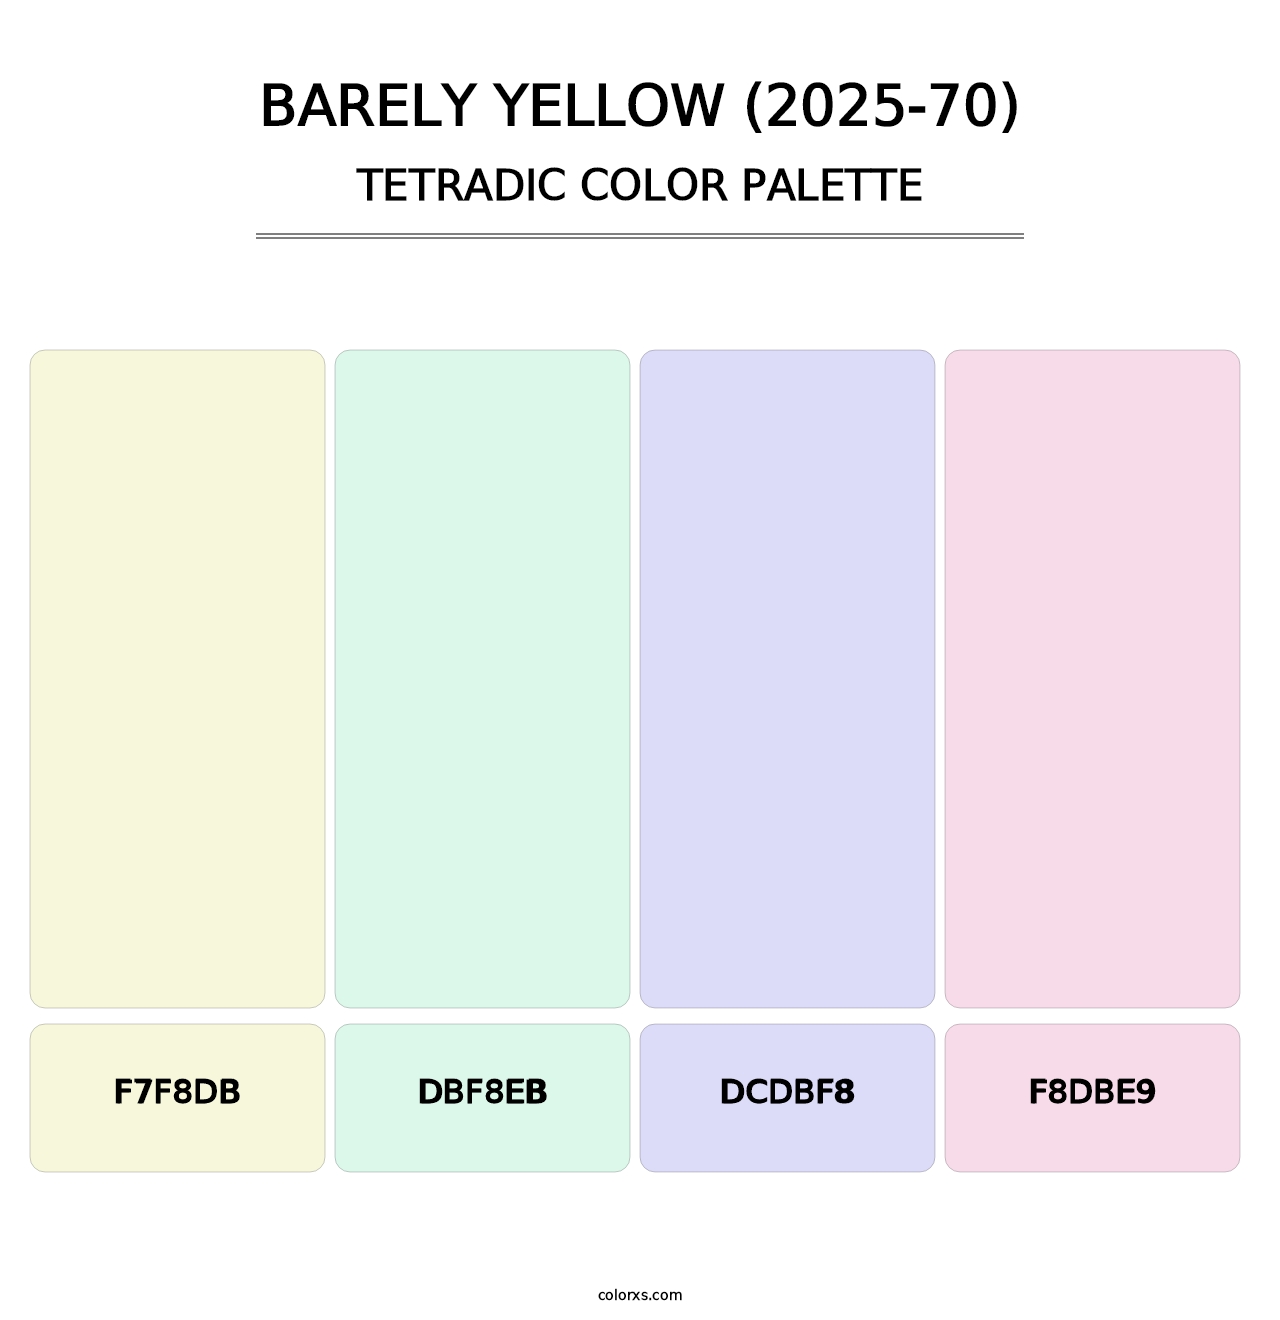 Barely Yellow (2025-70) - Tetradic Color Palette